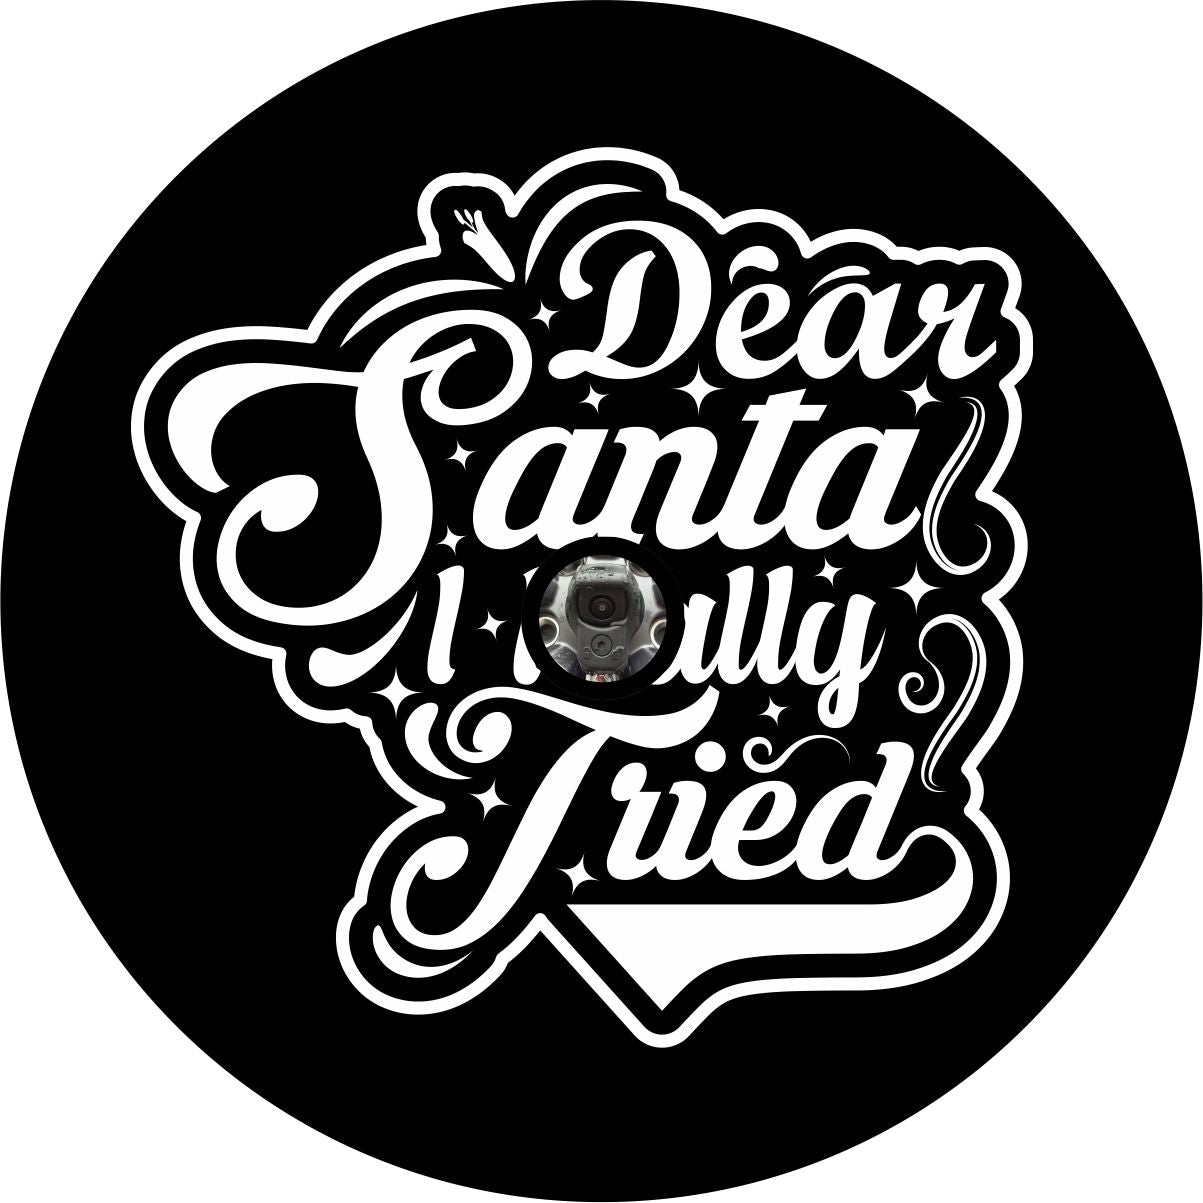 Bronco, RV, camper, trainer, Jeep spare tire cover design with back up camera hole and holiday themed saying, "Dear Santa I really tried"